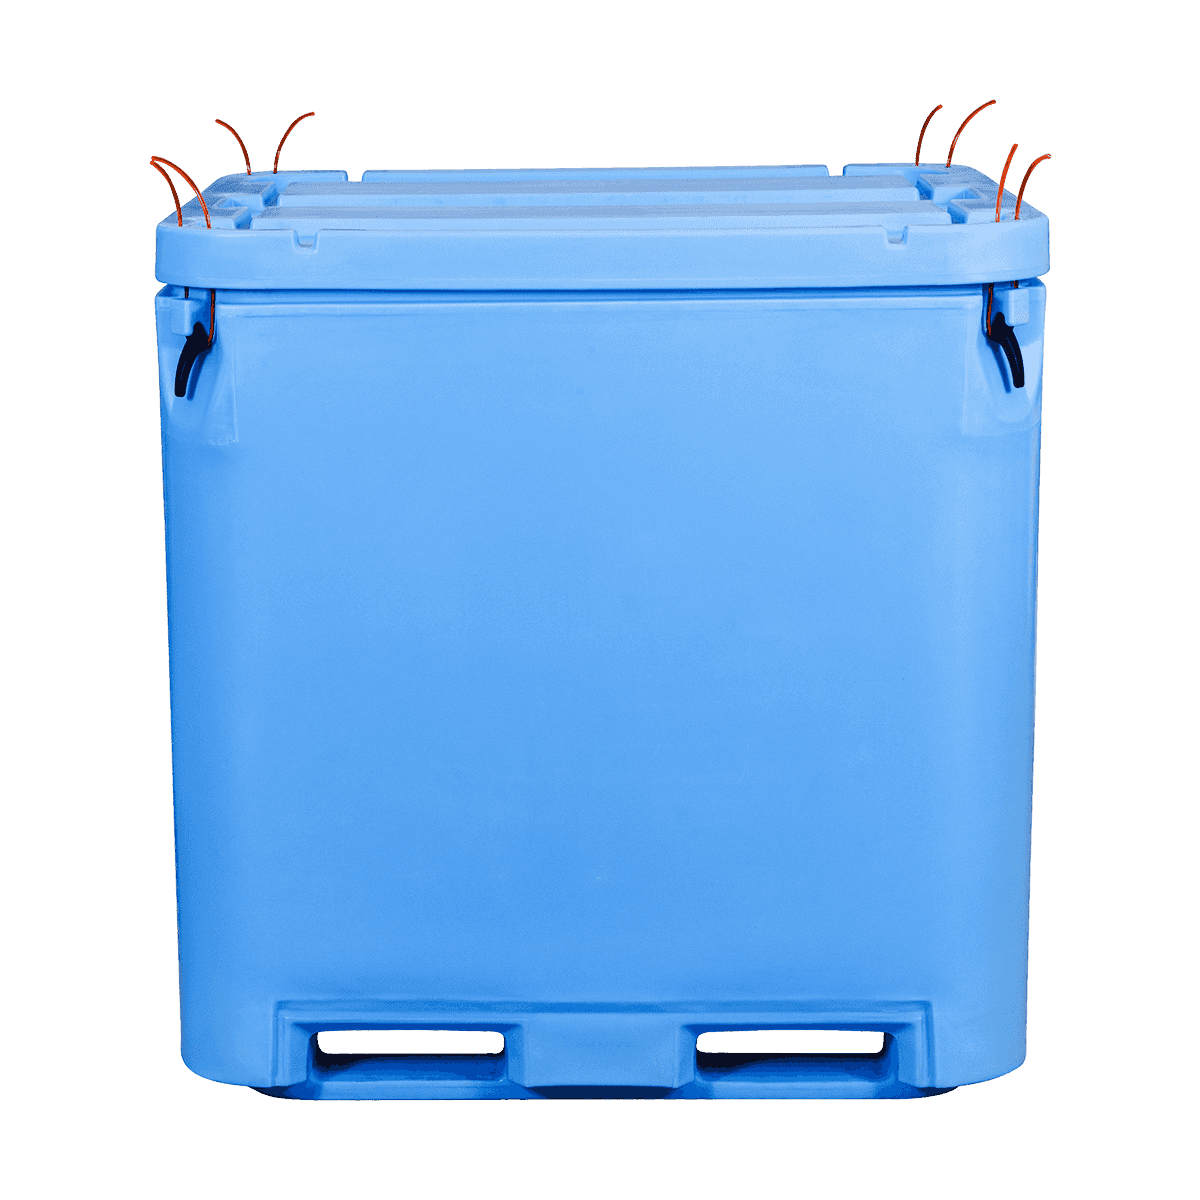 AF-1000L Insulated Fish Totes Seafood Industrial Use Plastic Containers